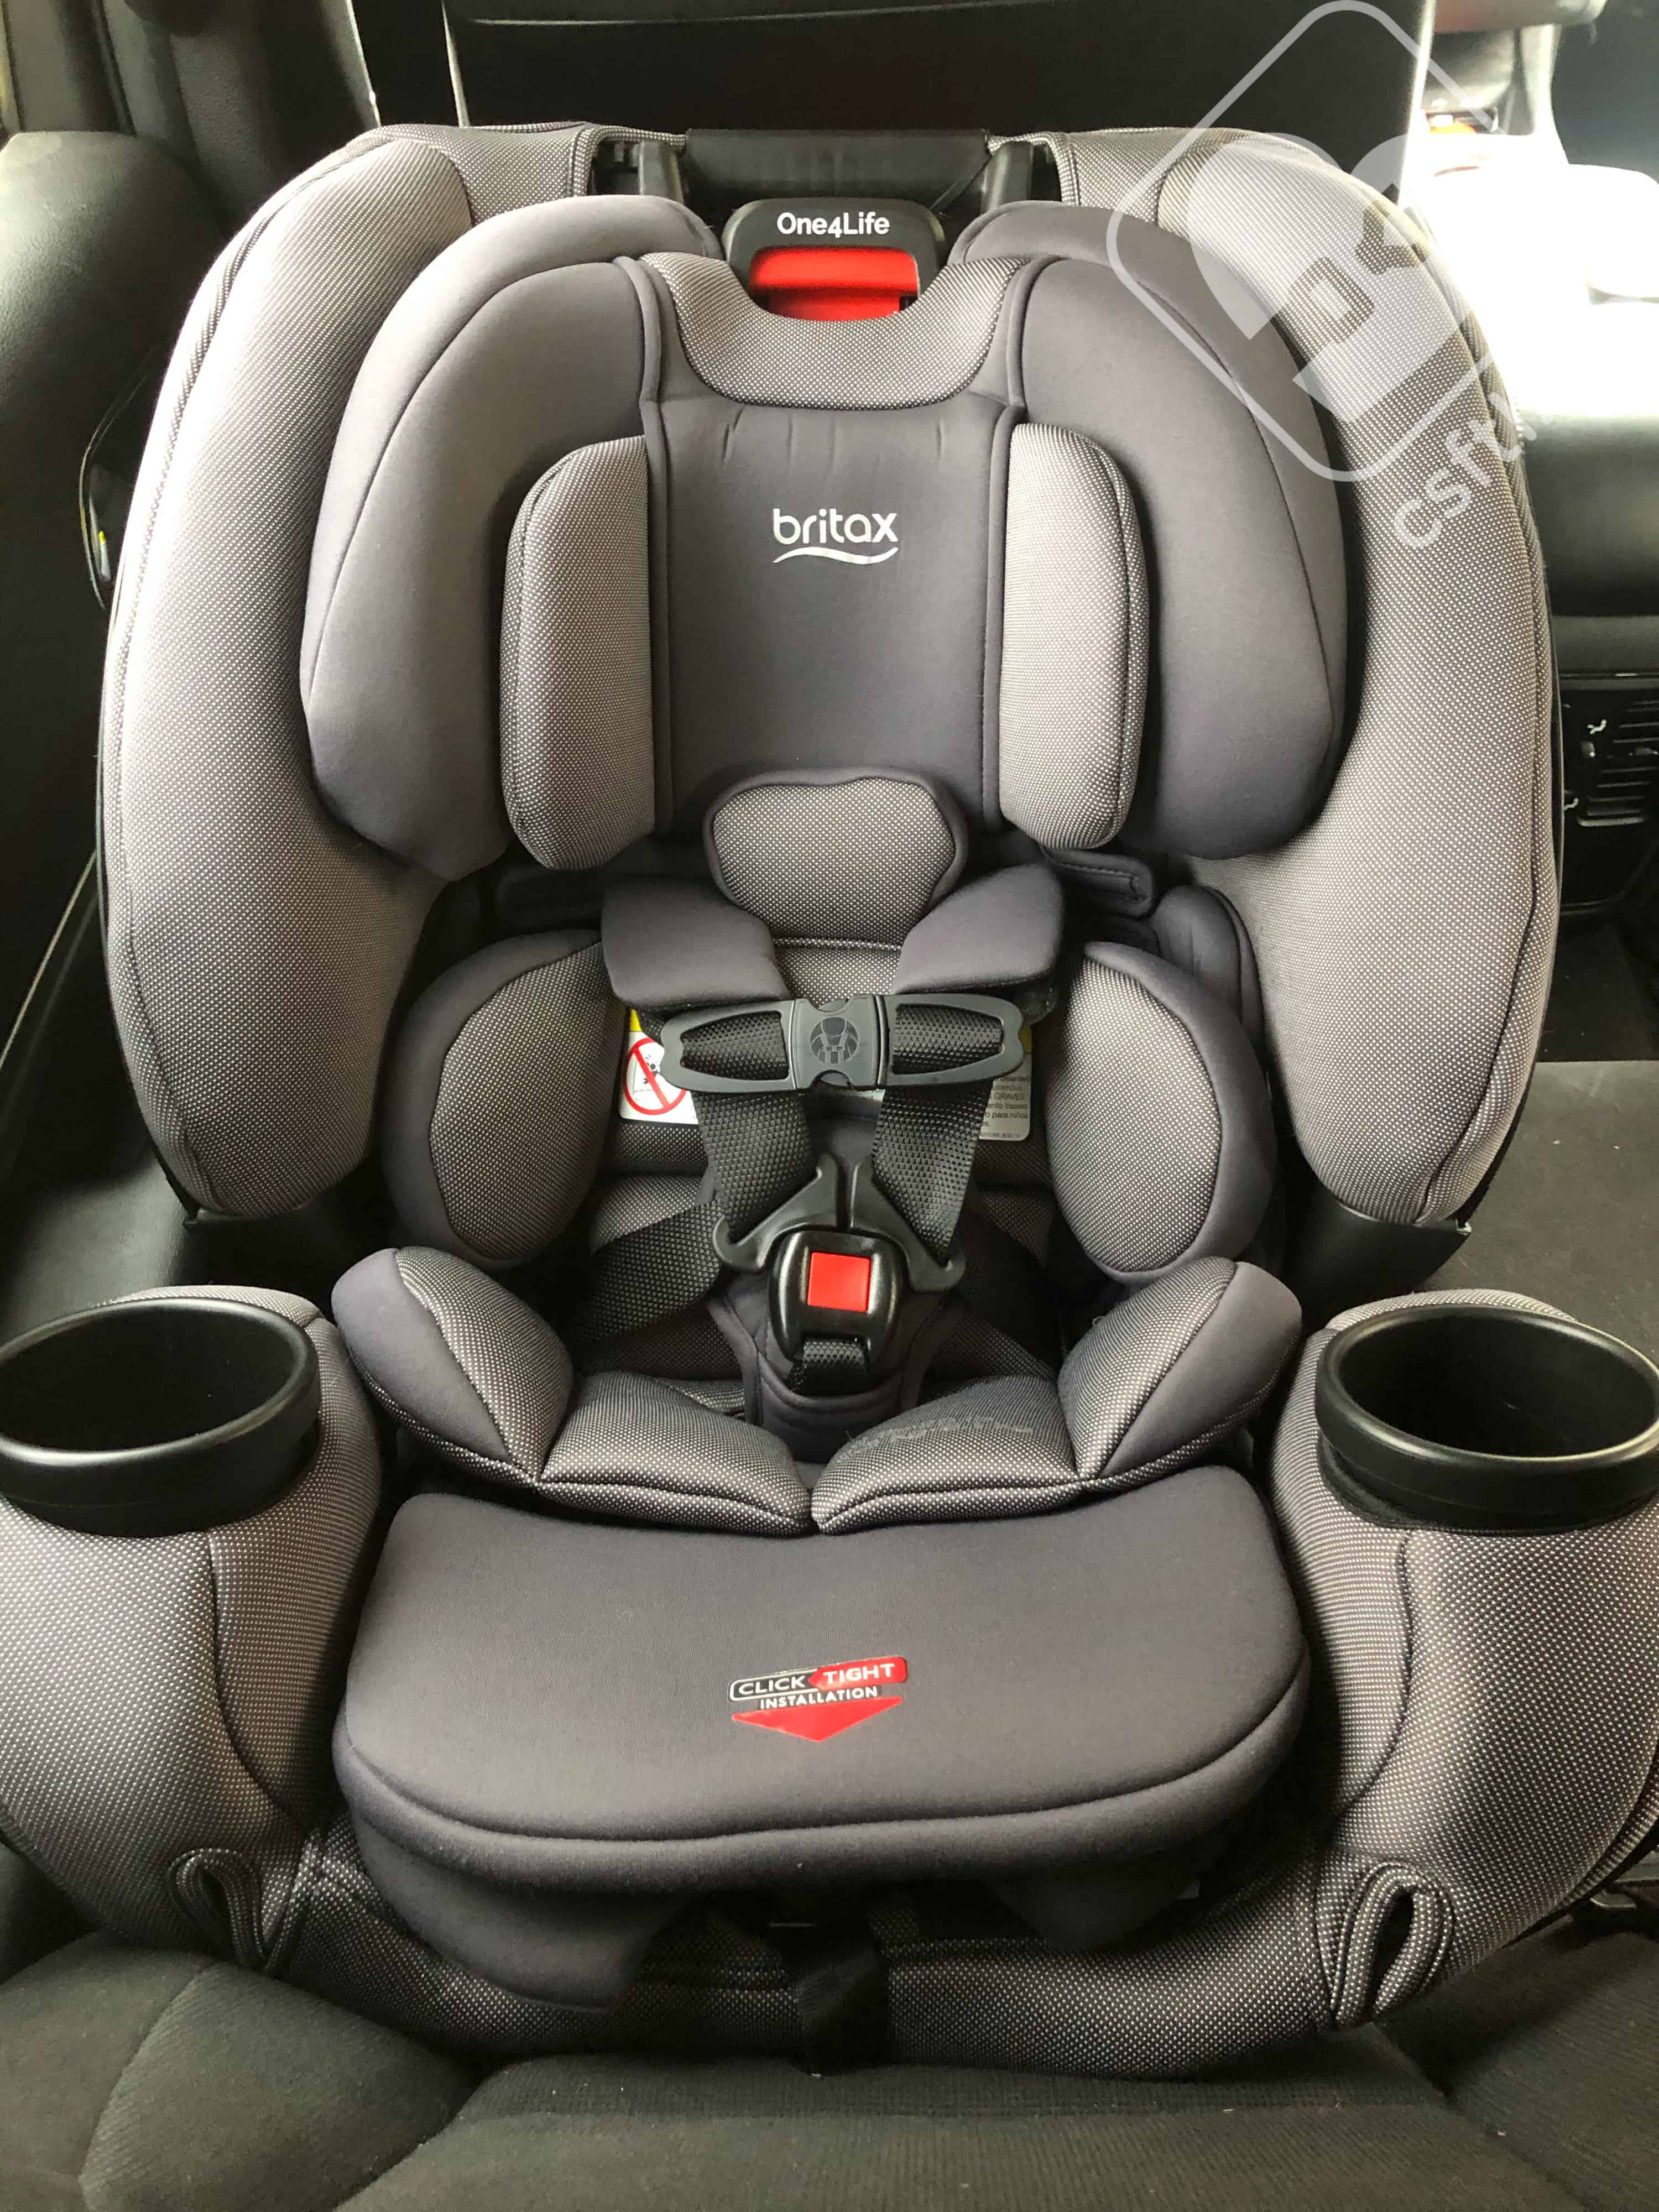 Britax One4life Review United States And Canada Car Seats For The Littles - Britax Car Seat Base Used